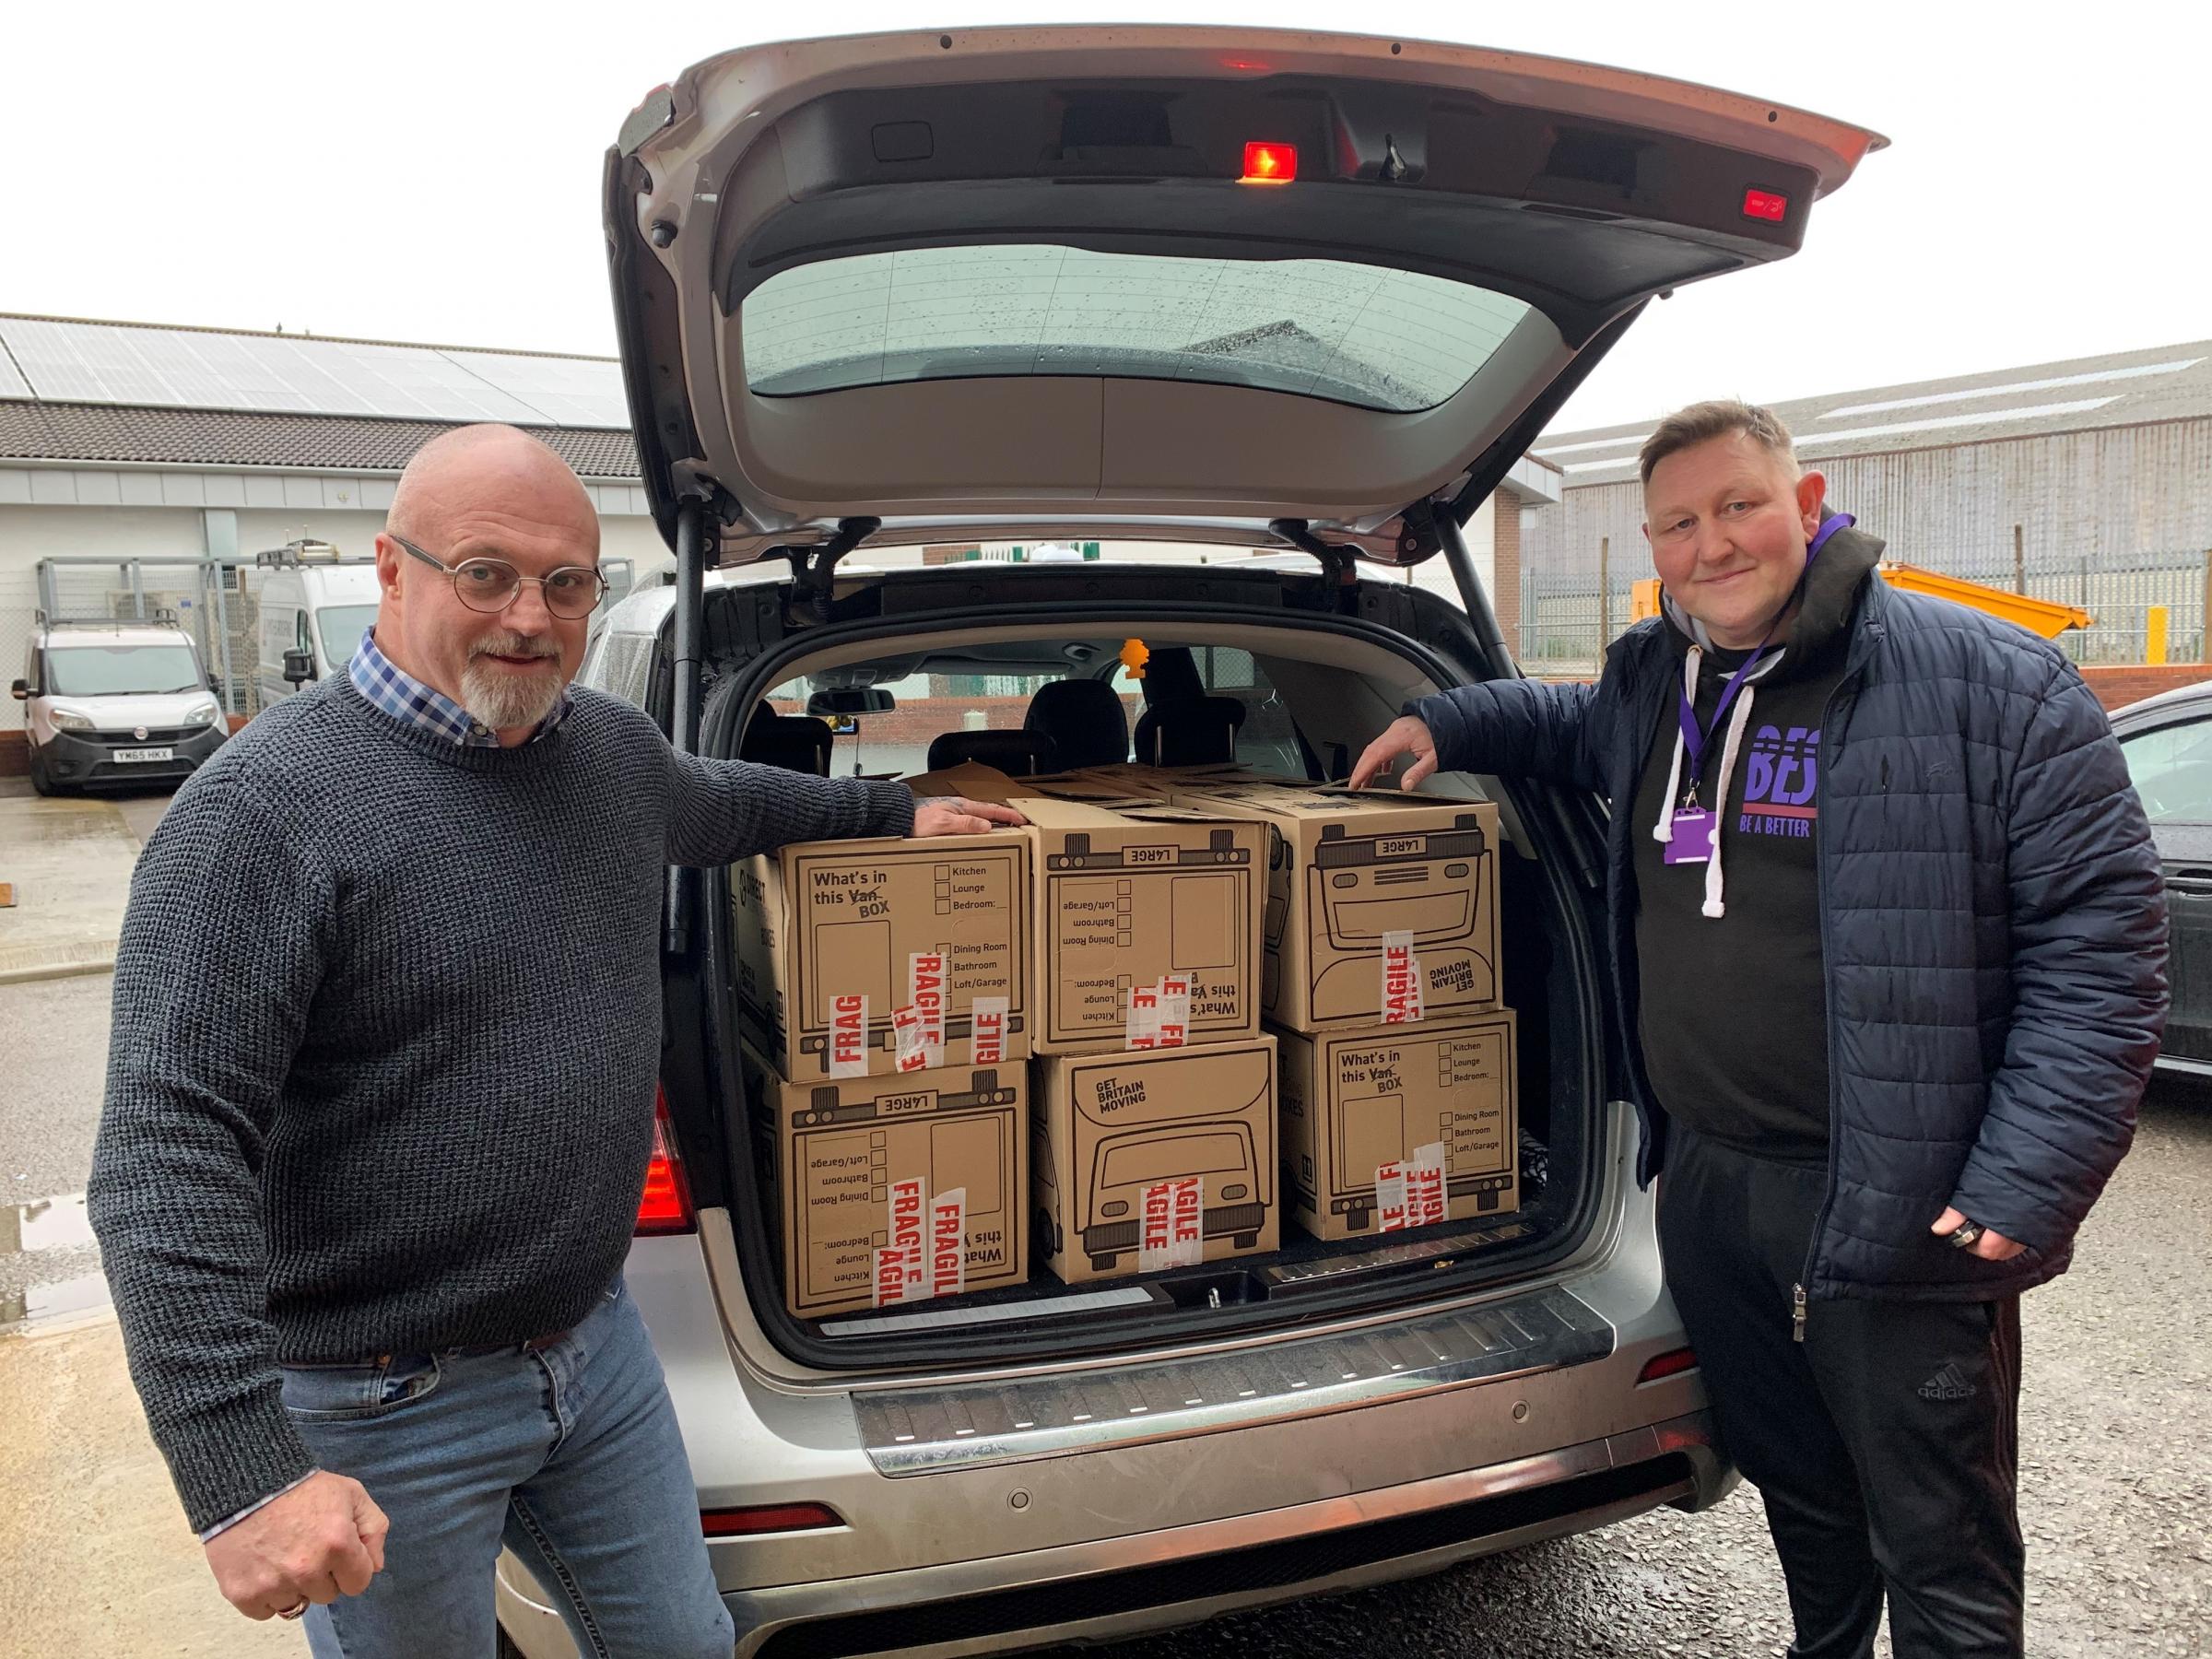 Don Bryden and Paul Rogers with the donated meals and presents for the BEST Christmas appeal